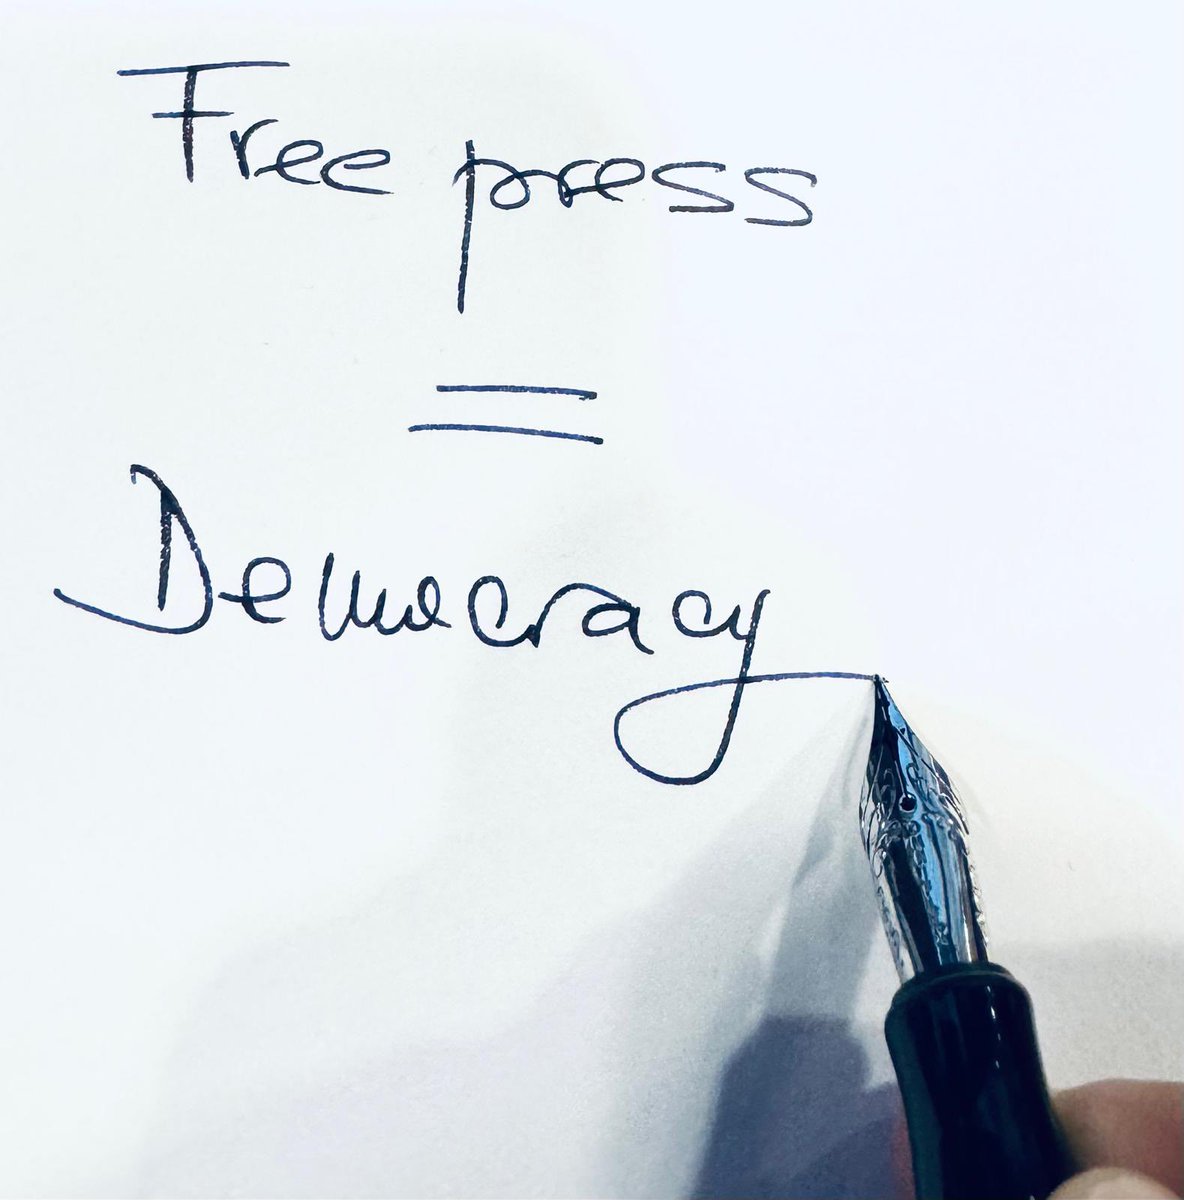 Free press is the shield of our freedom & democracy. In a world where war & tyranny cloud our horizons again, the work of brave journalists risking it all to uncover the truth is more important than ever. #WorldPressFreedomDay